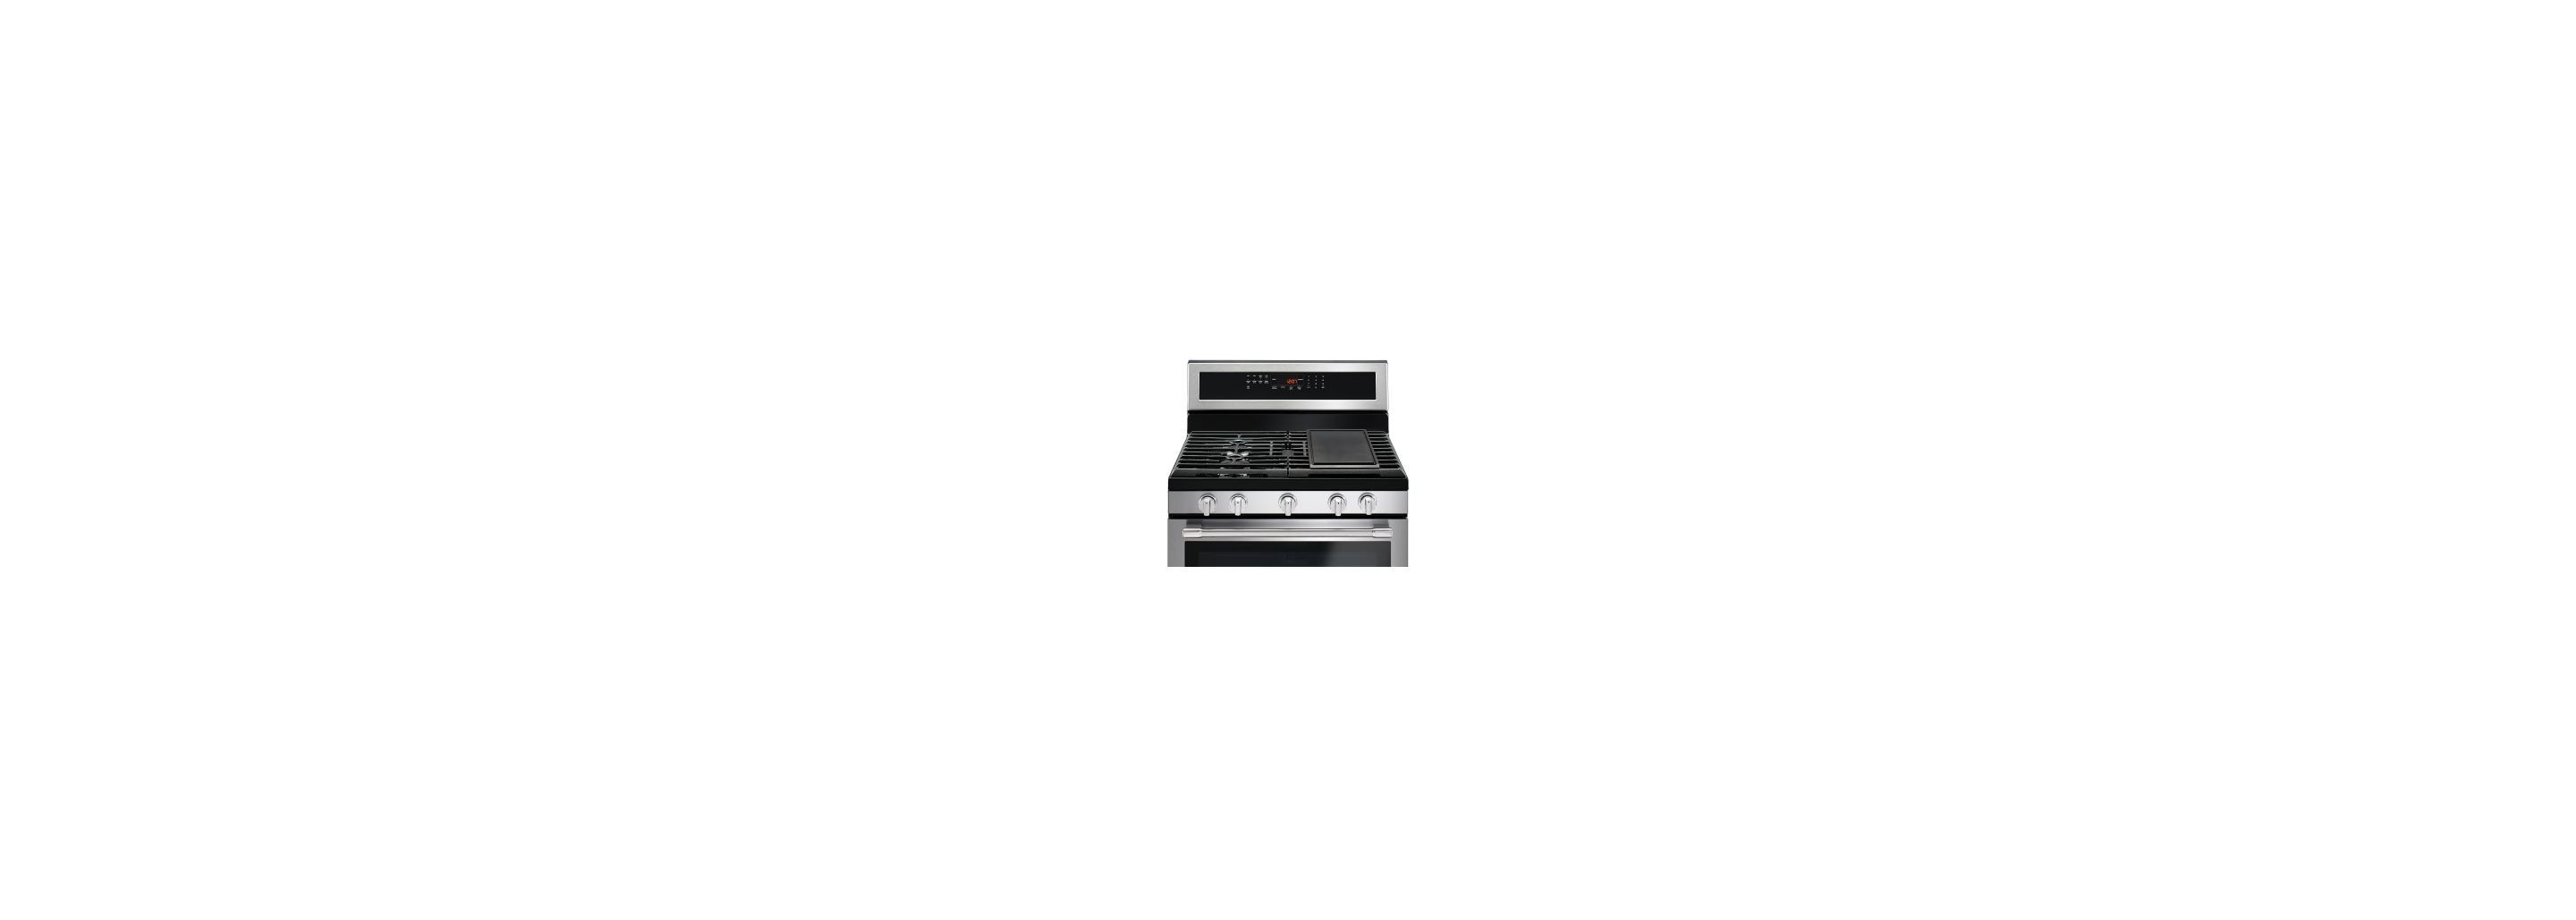 Best Stoves Ranges In 2021 For Your Home Maytag